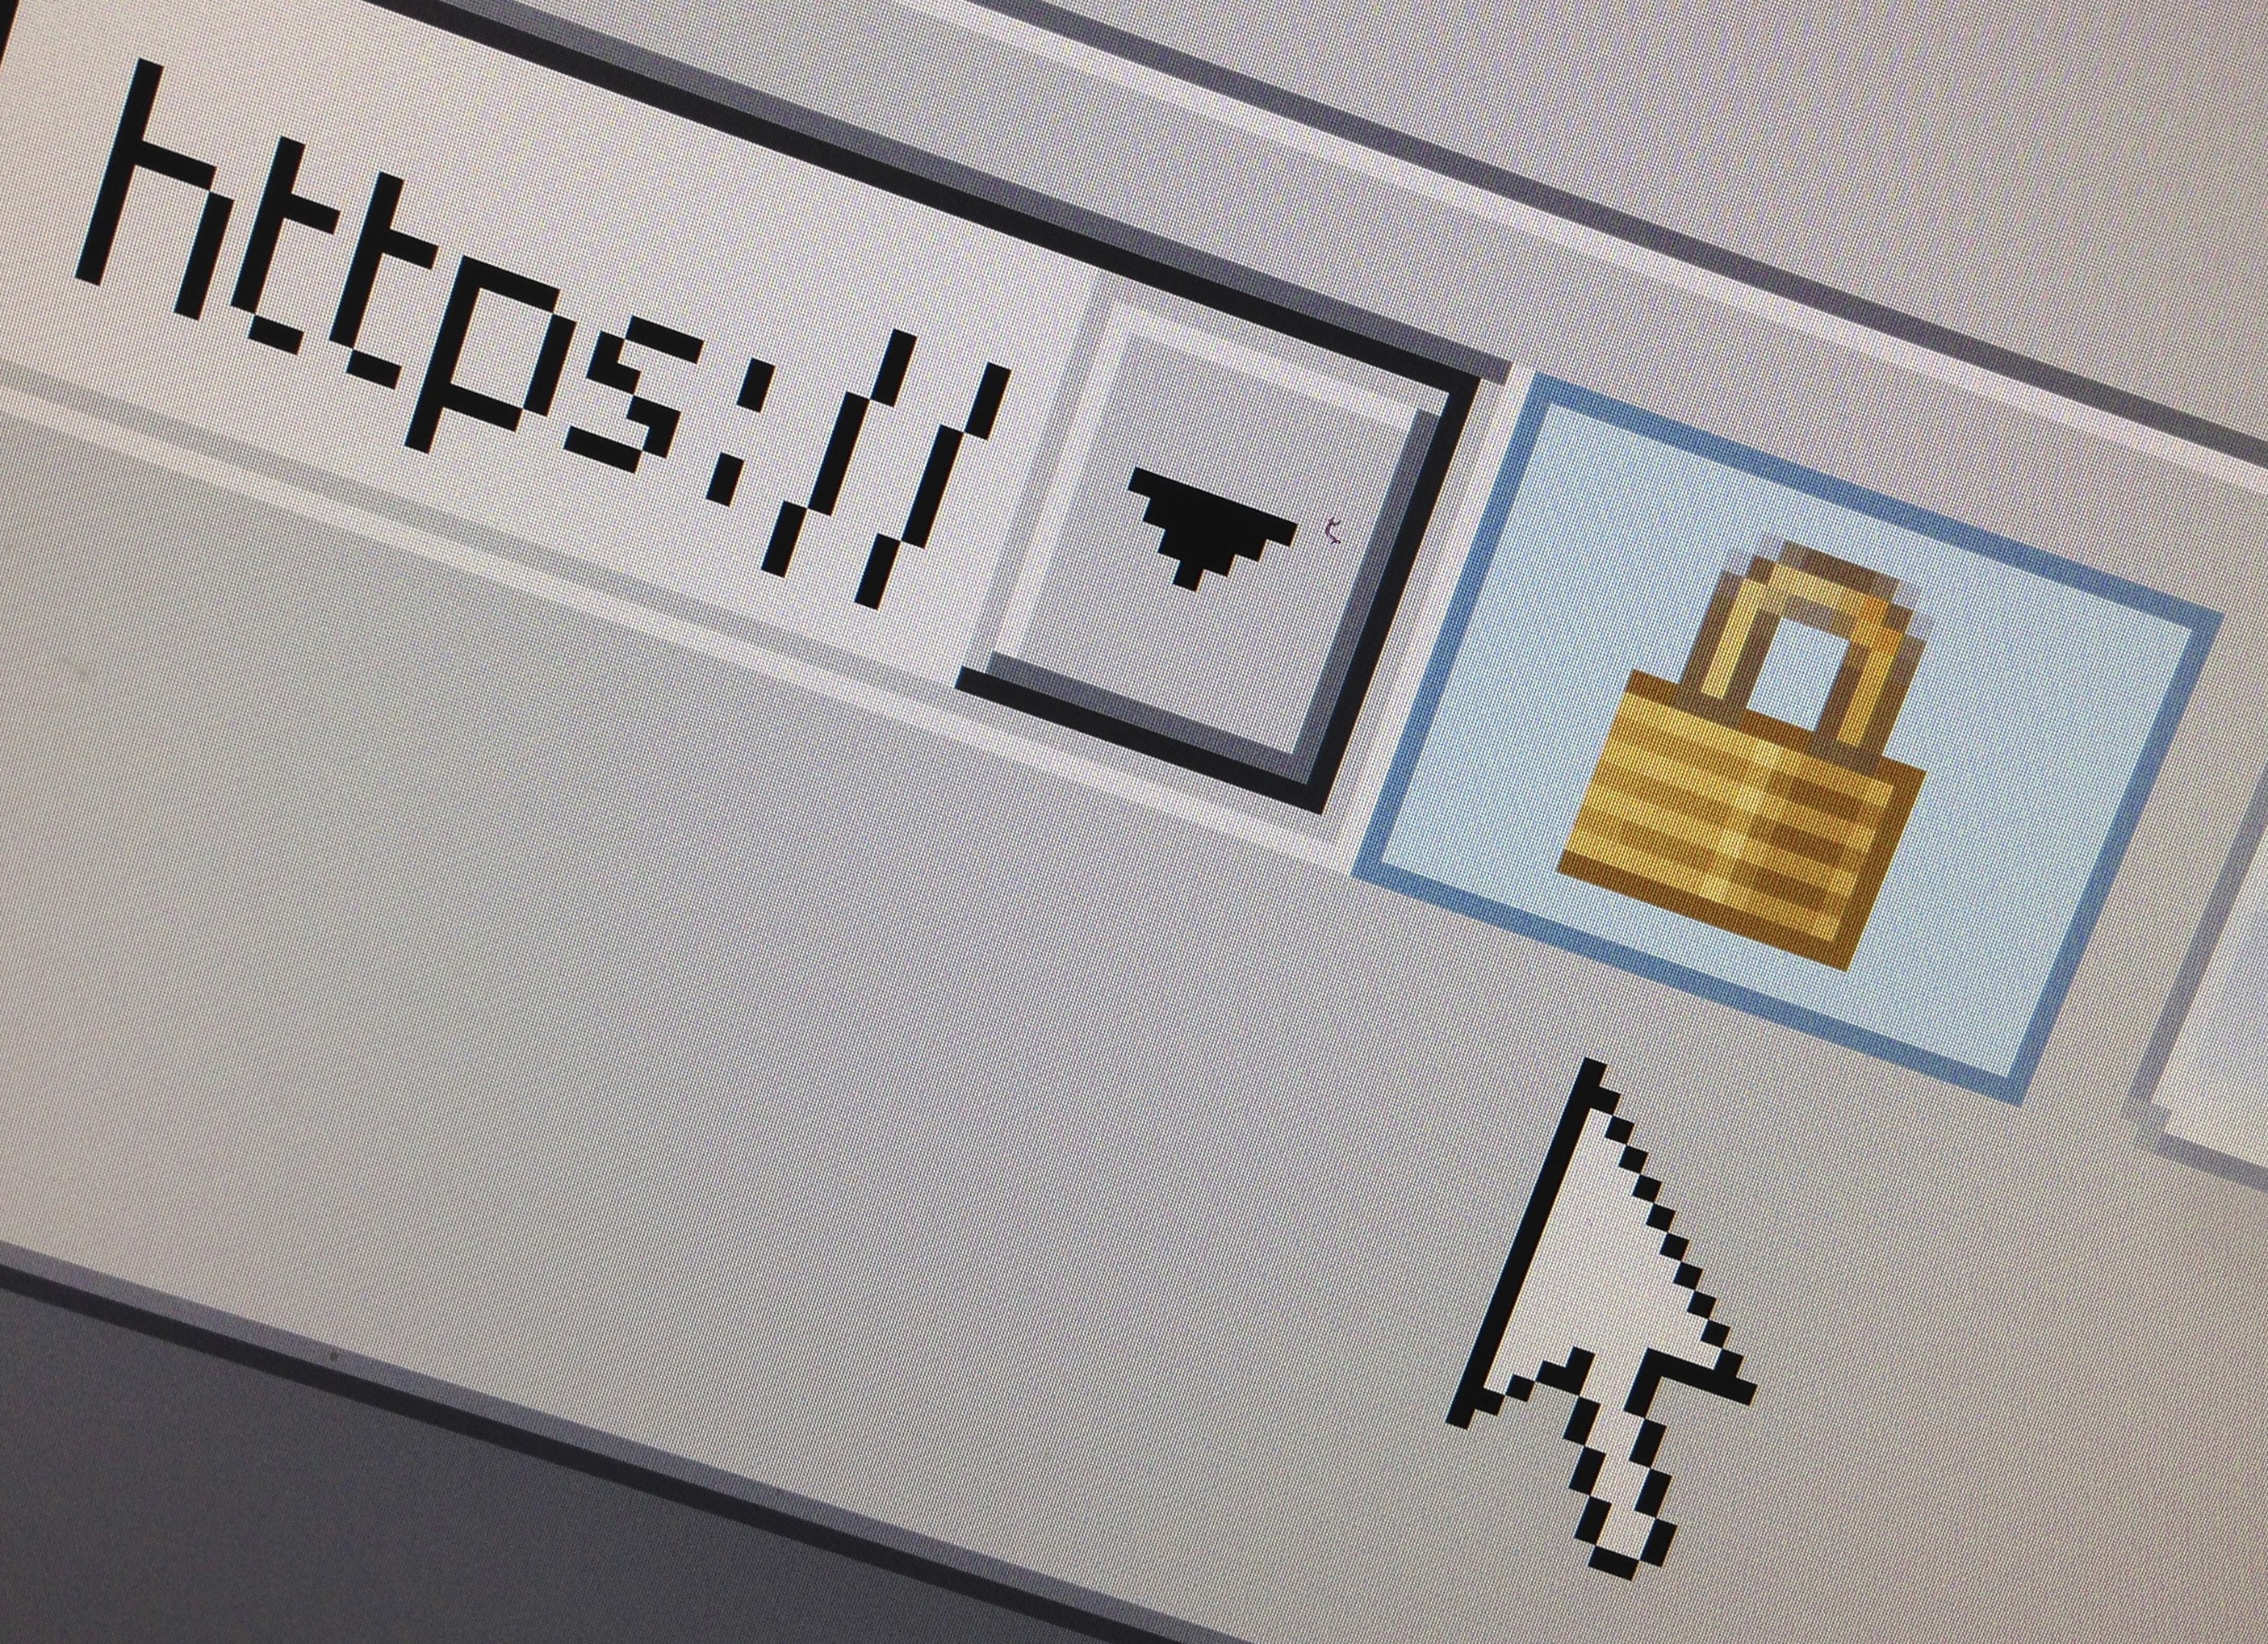 A lock icon, signifying an encrypted Internet connection, is seen on an Internet Explorer browser in Paris, 15 April 2014, REUTERS/Mal Langsdon